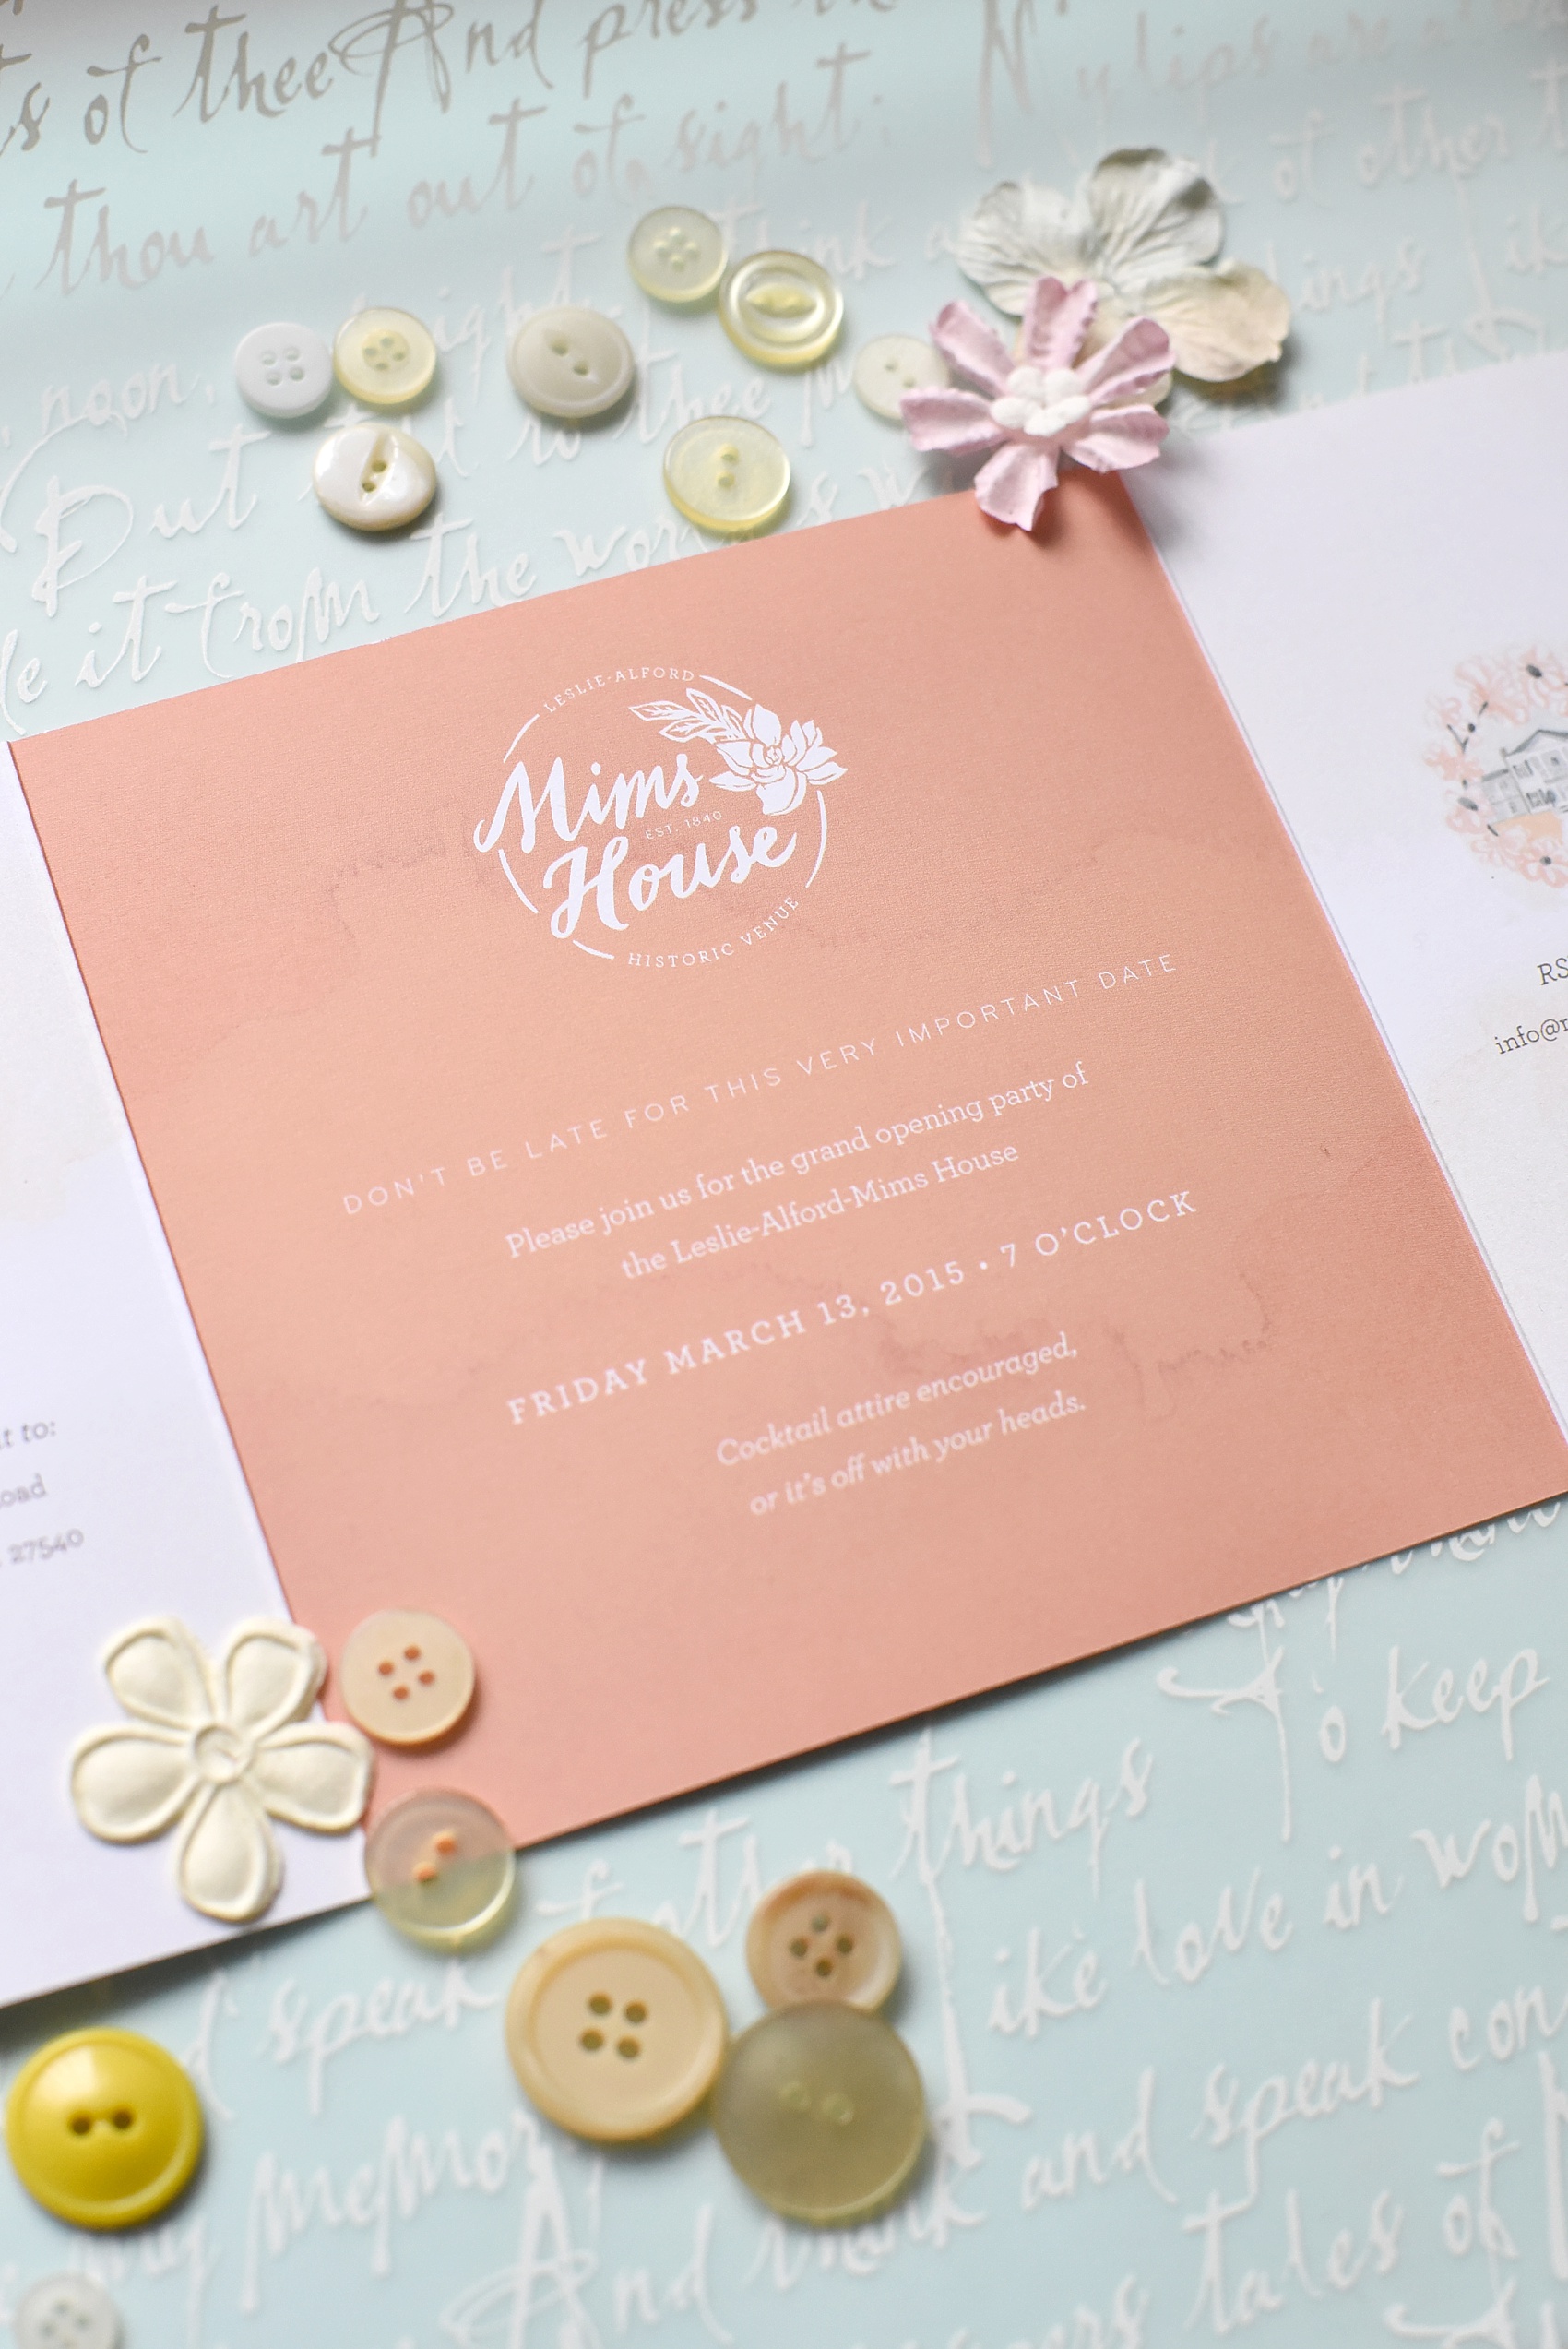 Raleigh wedding photographer, Mikkel Paige, attends Leslie Alford Mim's House opening party! Watercolor invitation by June Letter Studios. 